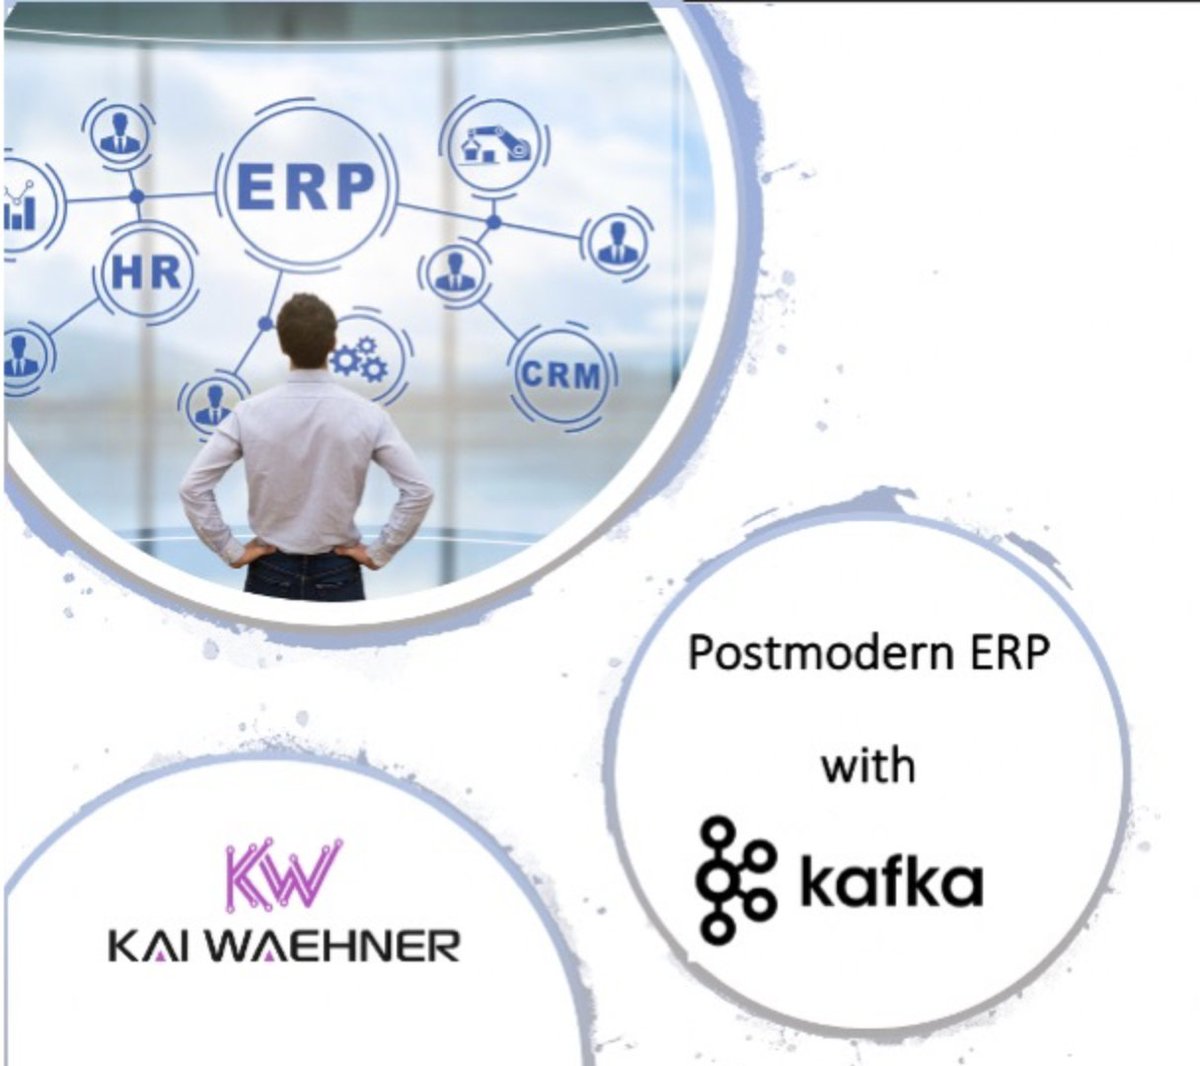 'Building a Postmodern #ERP with #ApacheKafka' => A Postmodern ERP combines #opensource technologies and proprietary standard software. Many solutions are #cloudnative or even offered as fully-managed #SaaS cloud offerings powered by Kafka. kai-waehner.de/blog/2020/11/2…